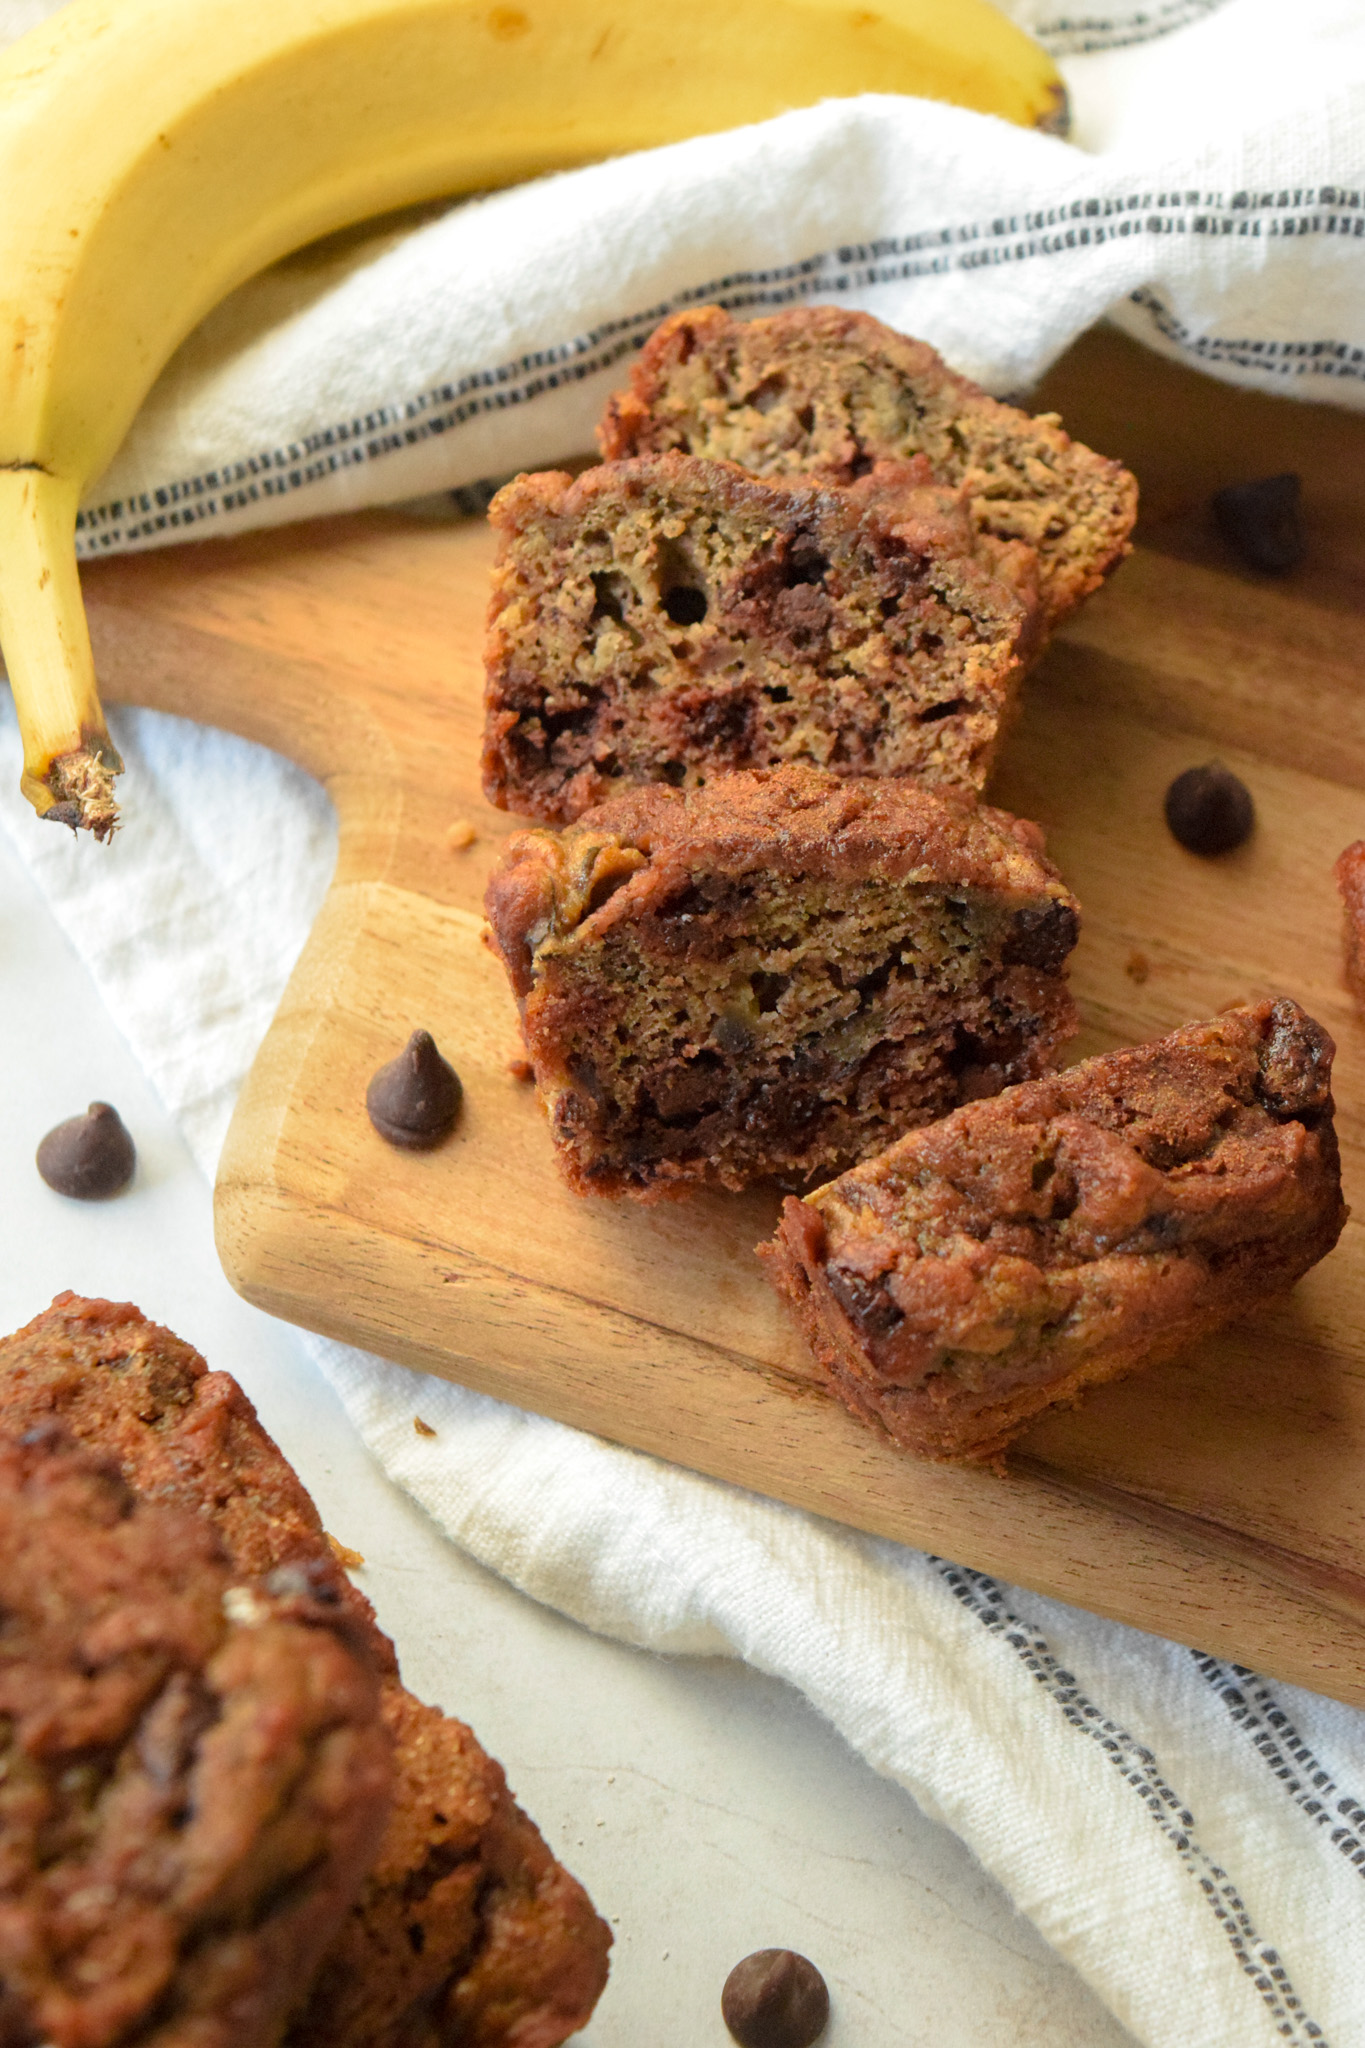 Gluten Free Banana Bread with Chocolate Chips